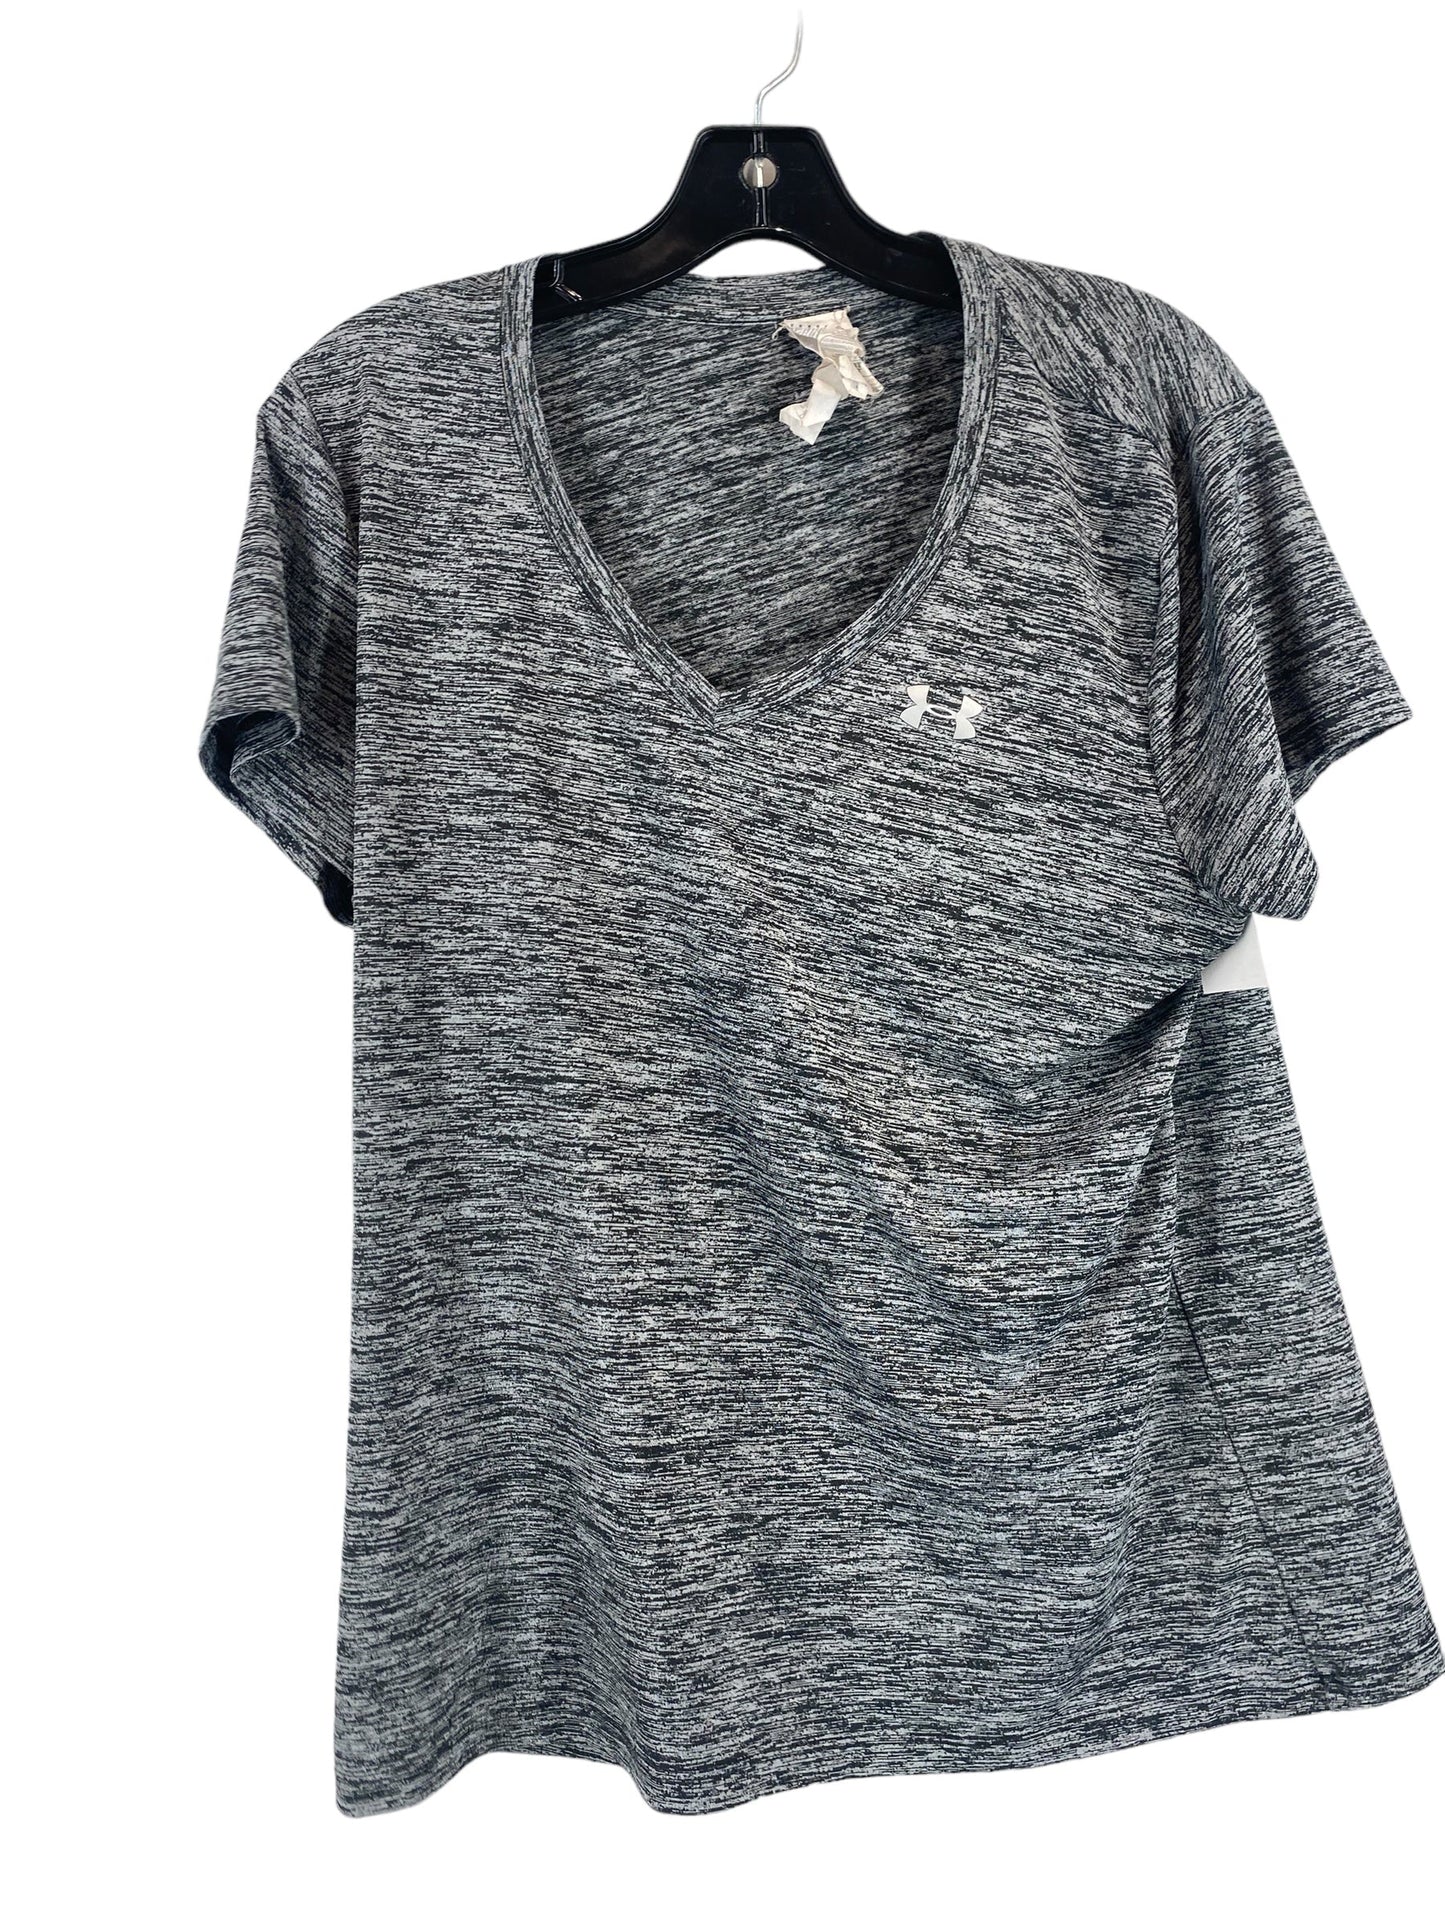 Grey Top Short Sleeve Under Armour, Size L